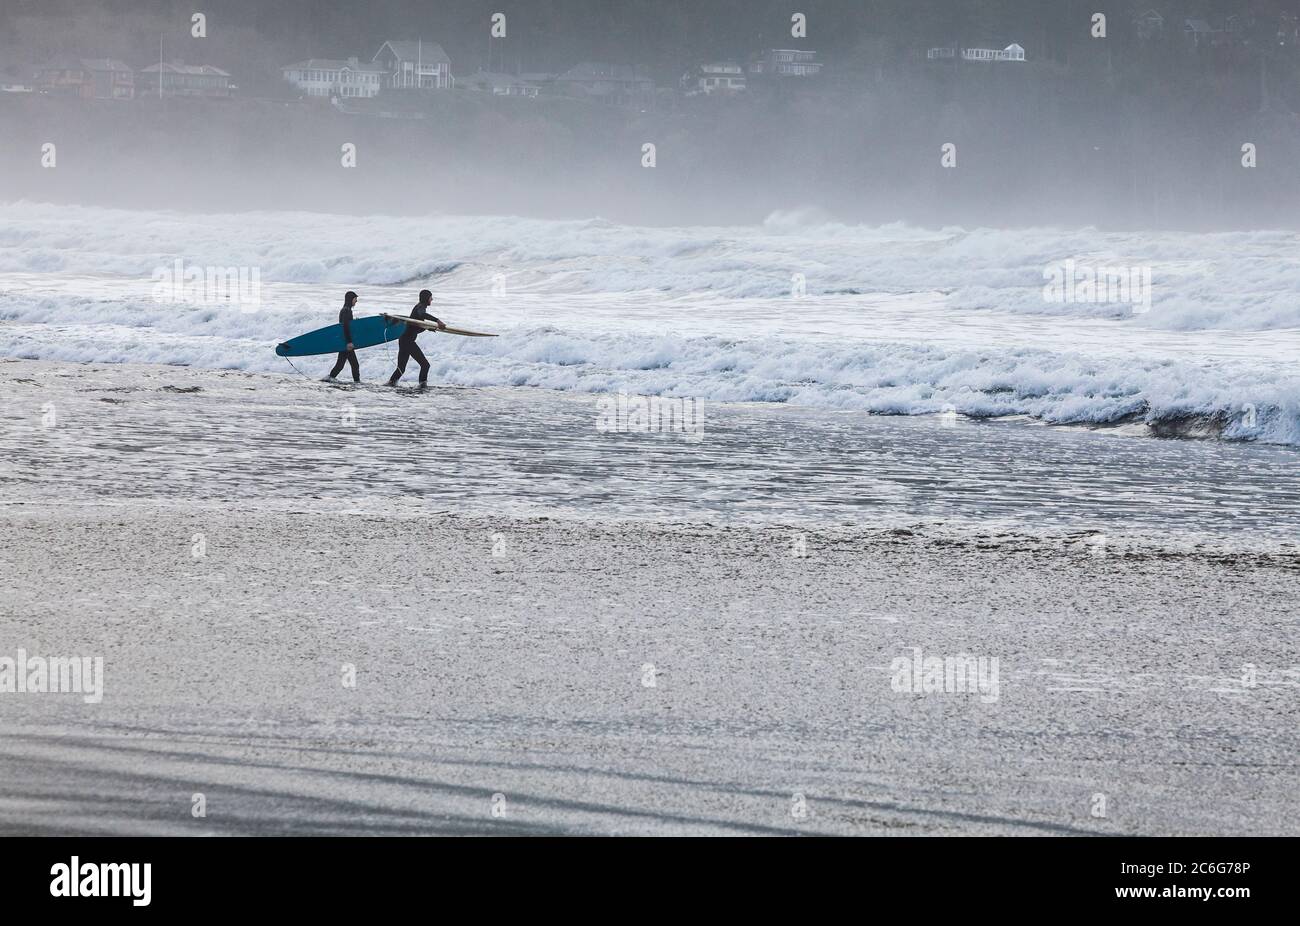 Two young men headed out into the suf with surfboards. Pacific coast, Seaside, Oregon, USA. Stock Photo